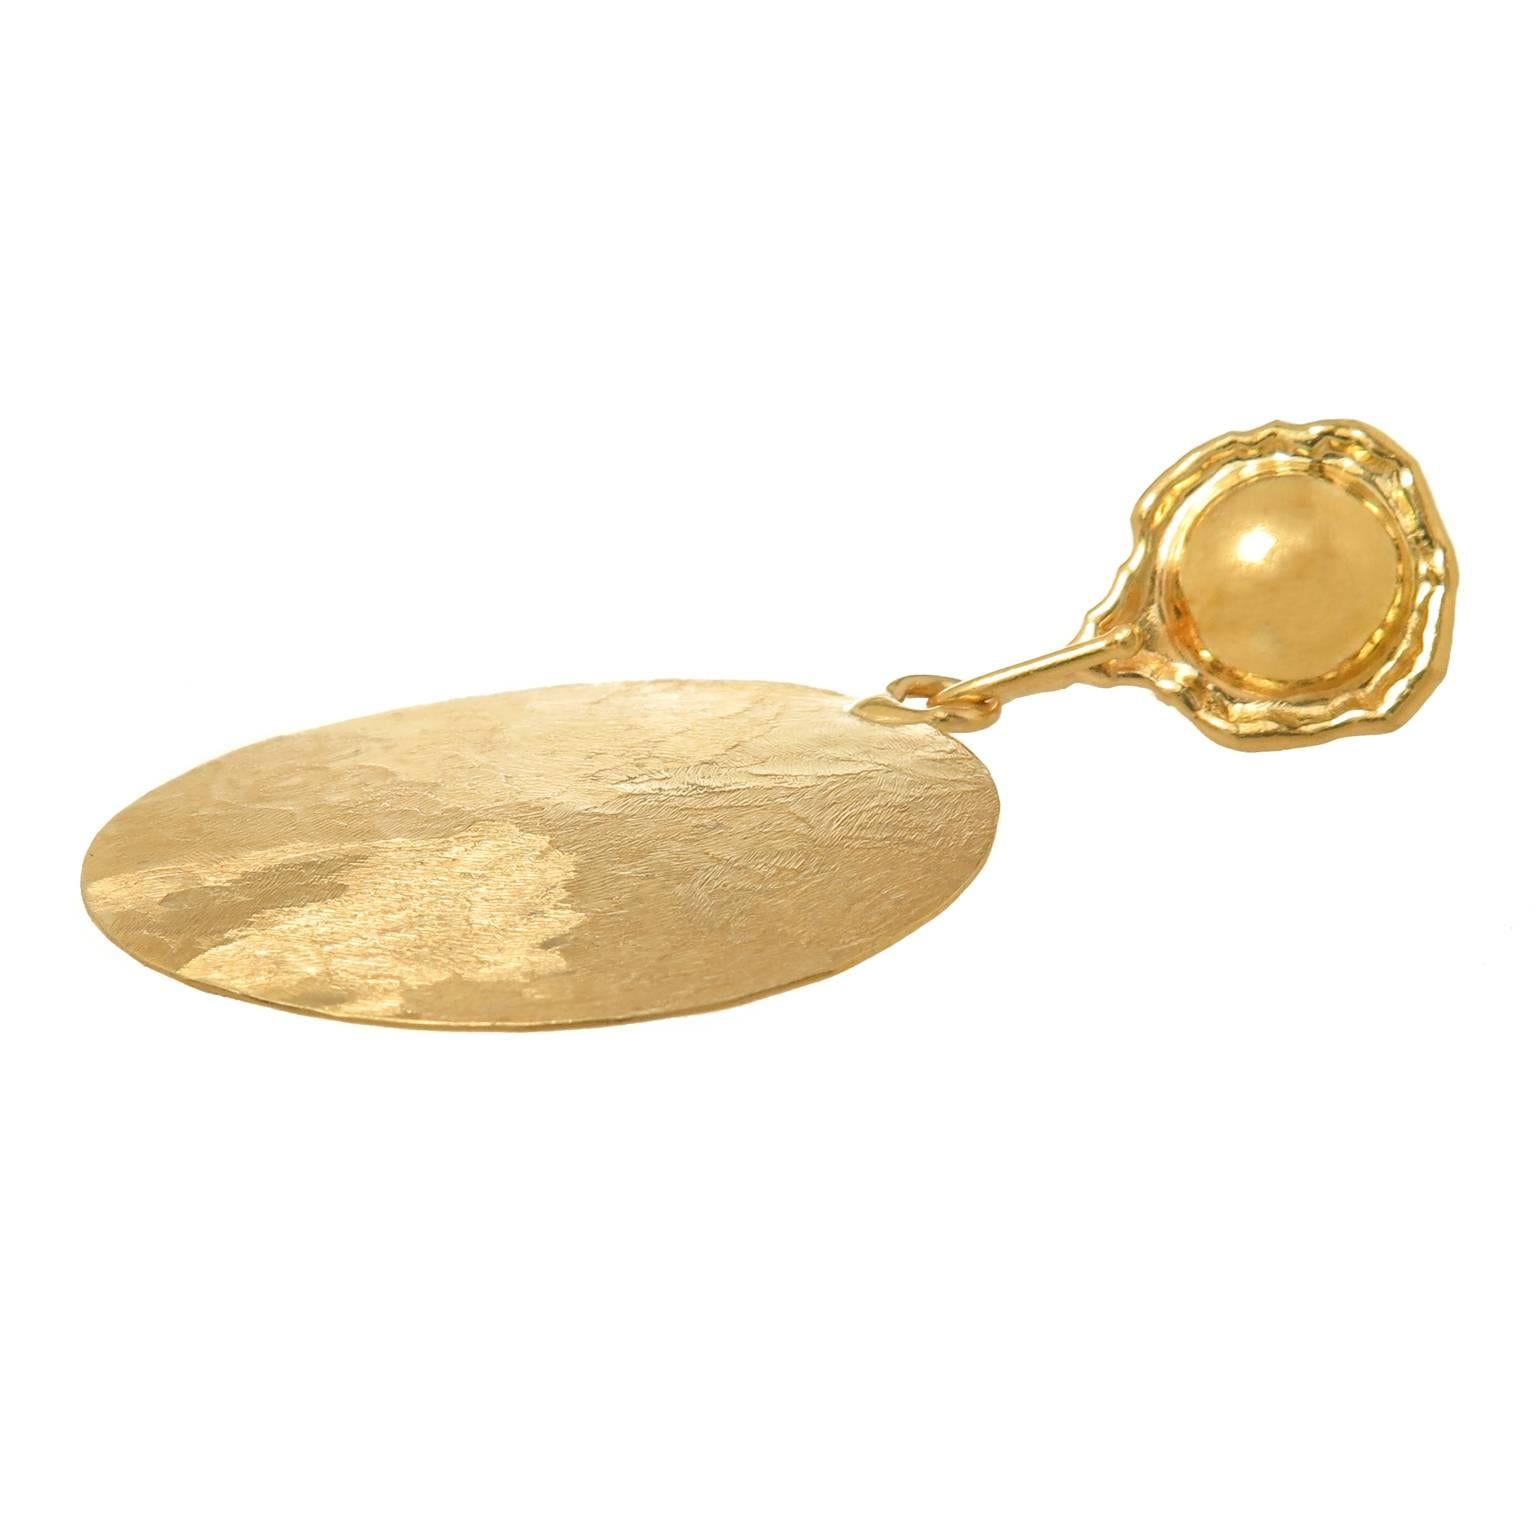 Circa 1990s Jean Mahie 18K yellow Gold Hand Hammered and textured Large Disk Earrings, the bottom round disks measure 1 5/8 inch with the top portion measuring 5/8 inch in diameter, total length of the earrings 2 5/8 inch. The disks are detachable